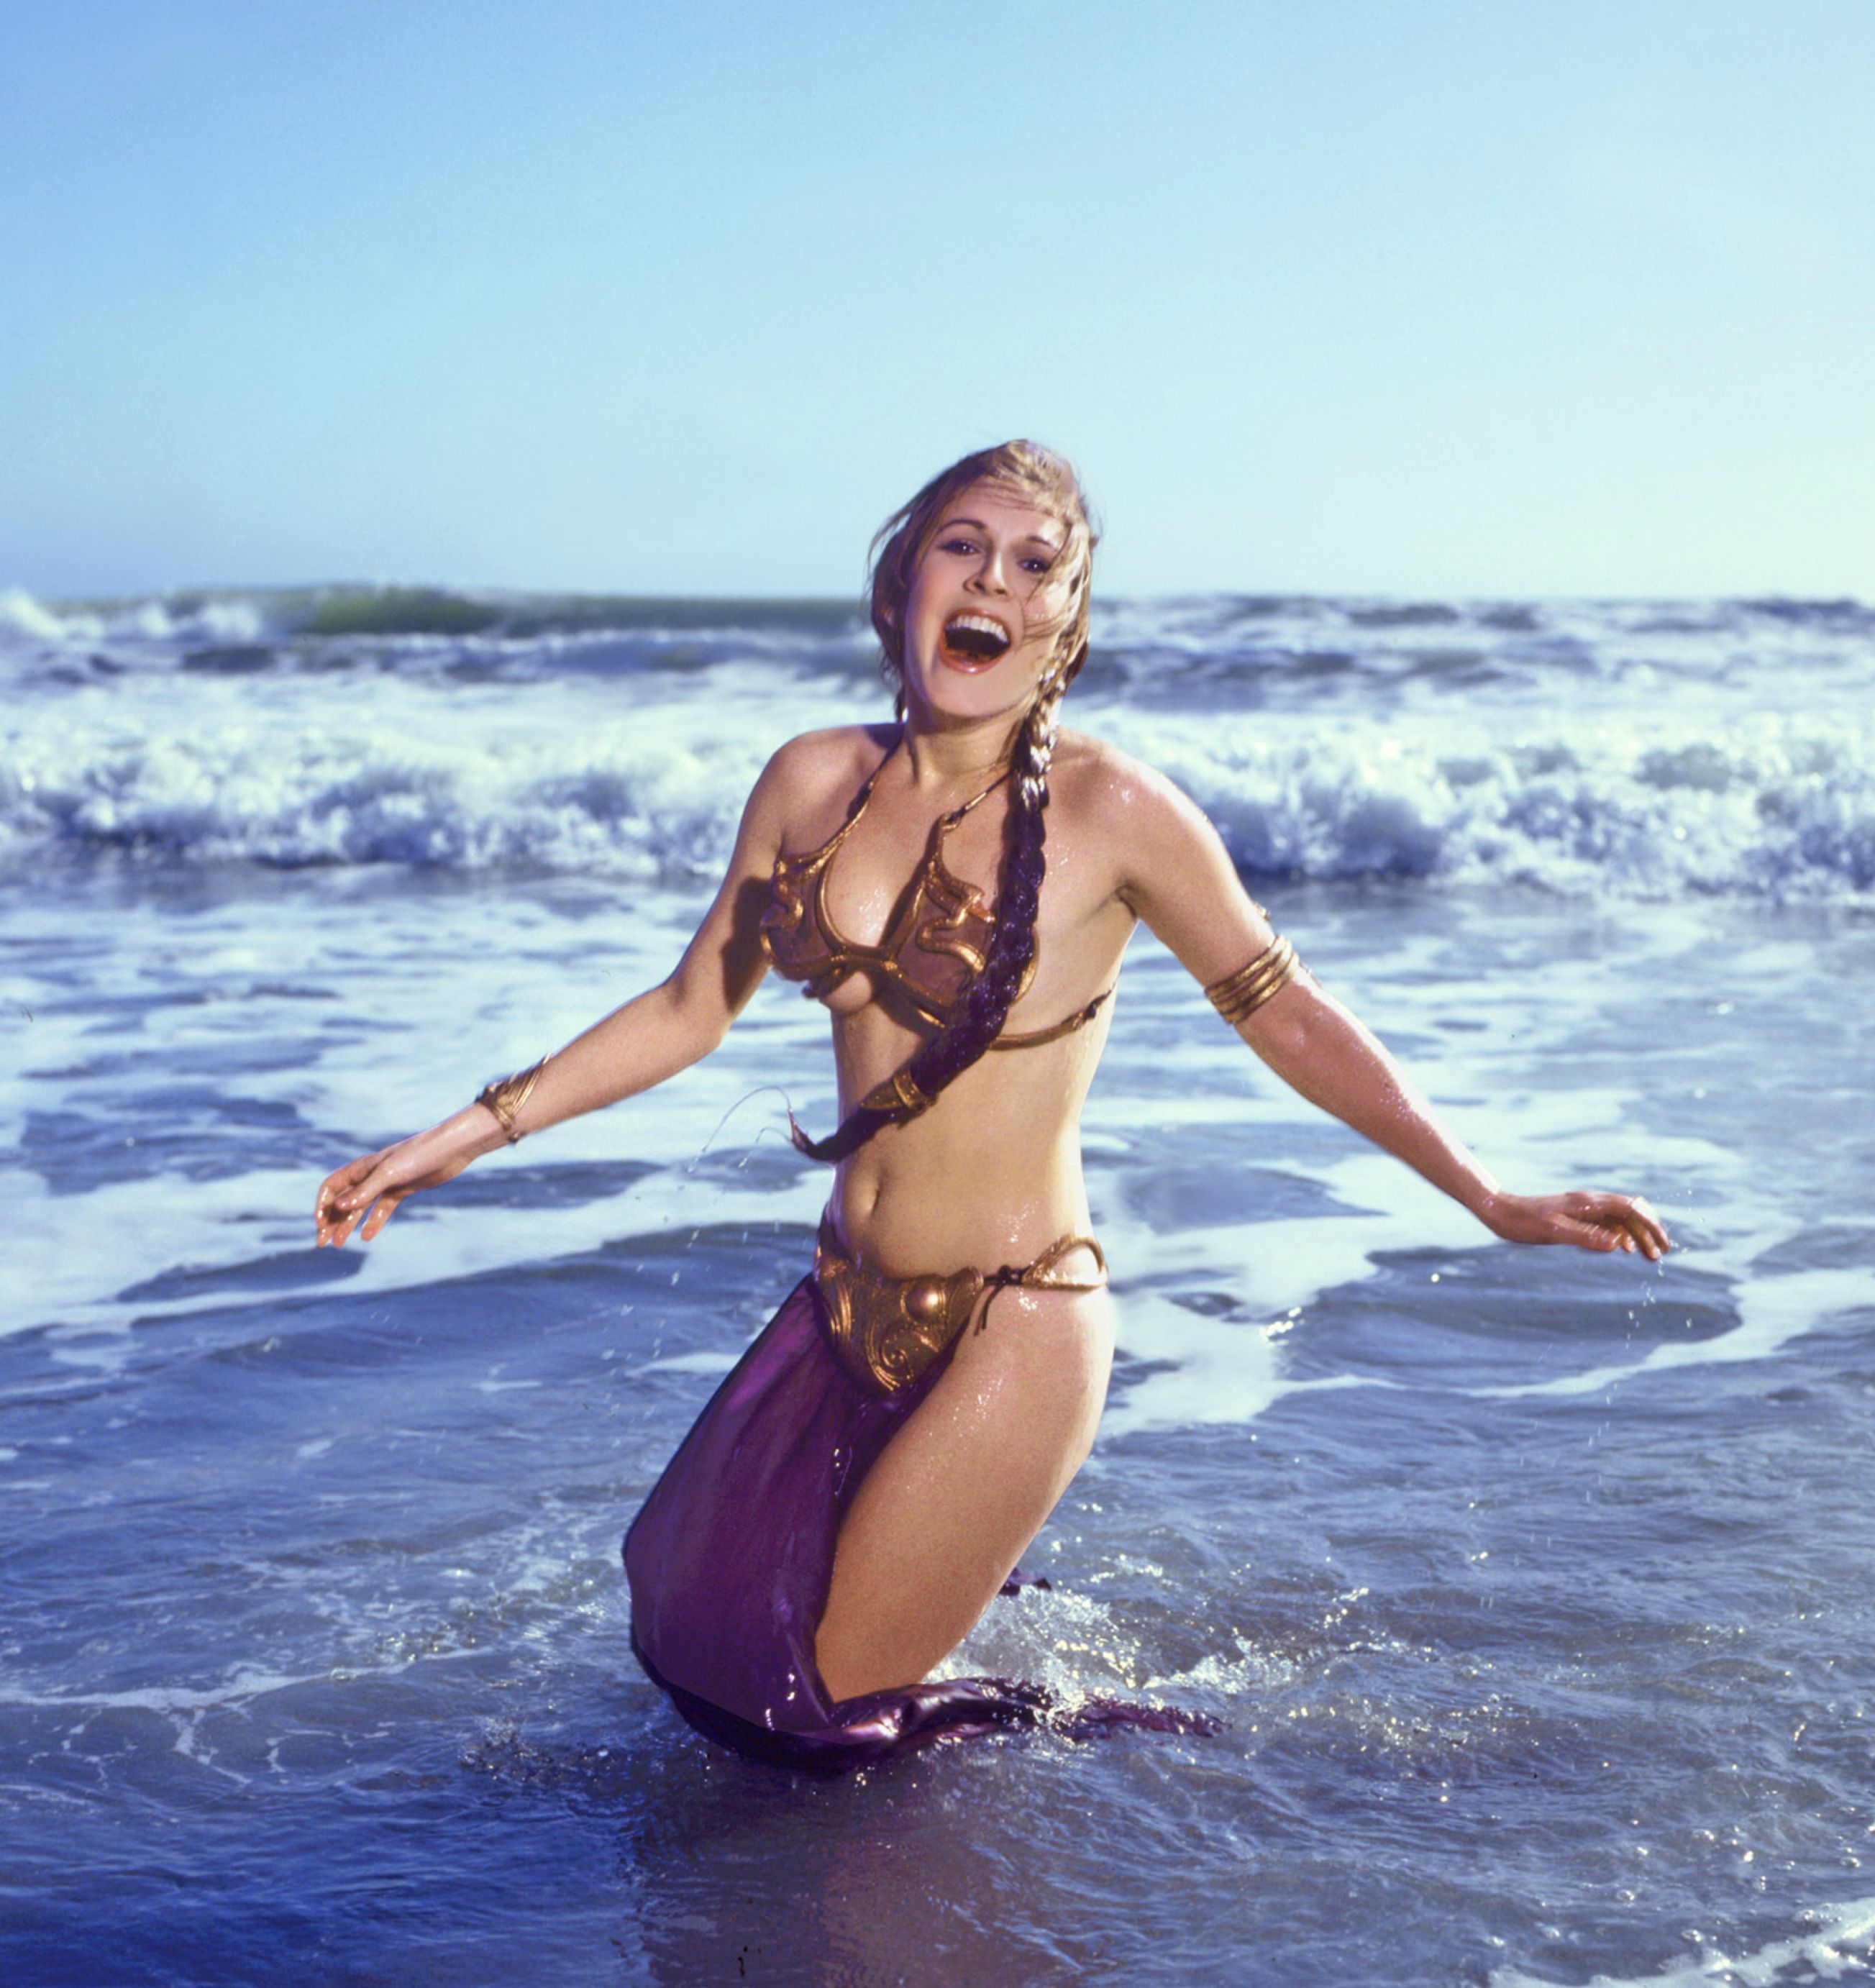 Photos of Carrie Fisher promoting “Return of the Jedi” at a Rolling Stone Magazine beach shoot, 1983.